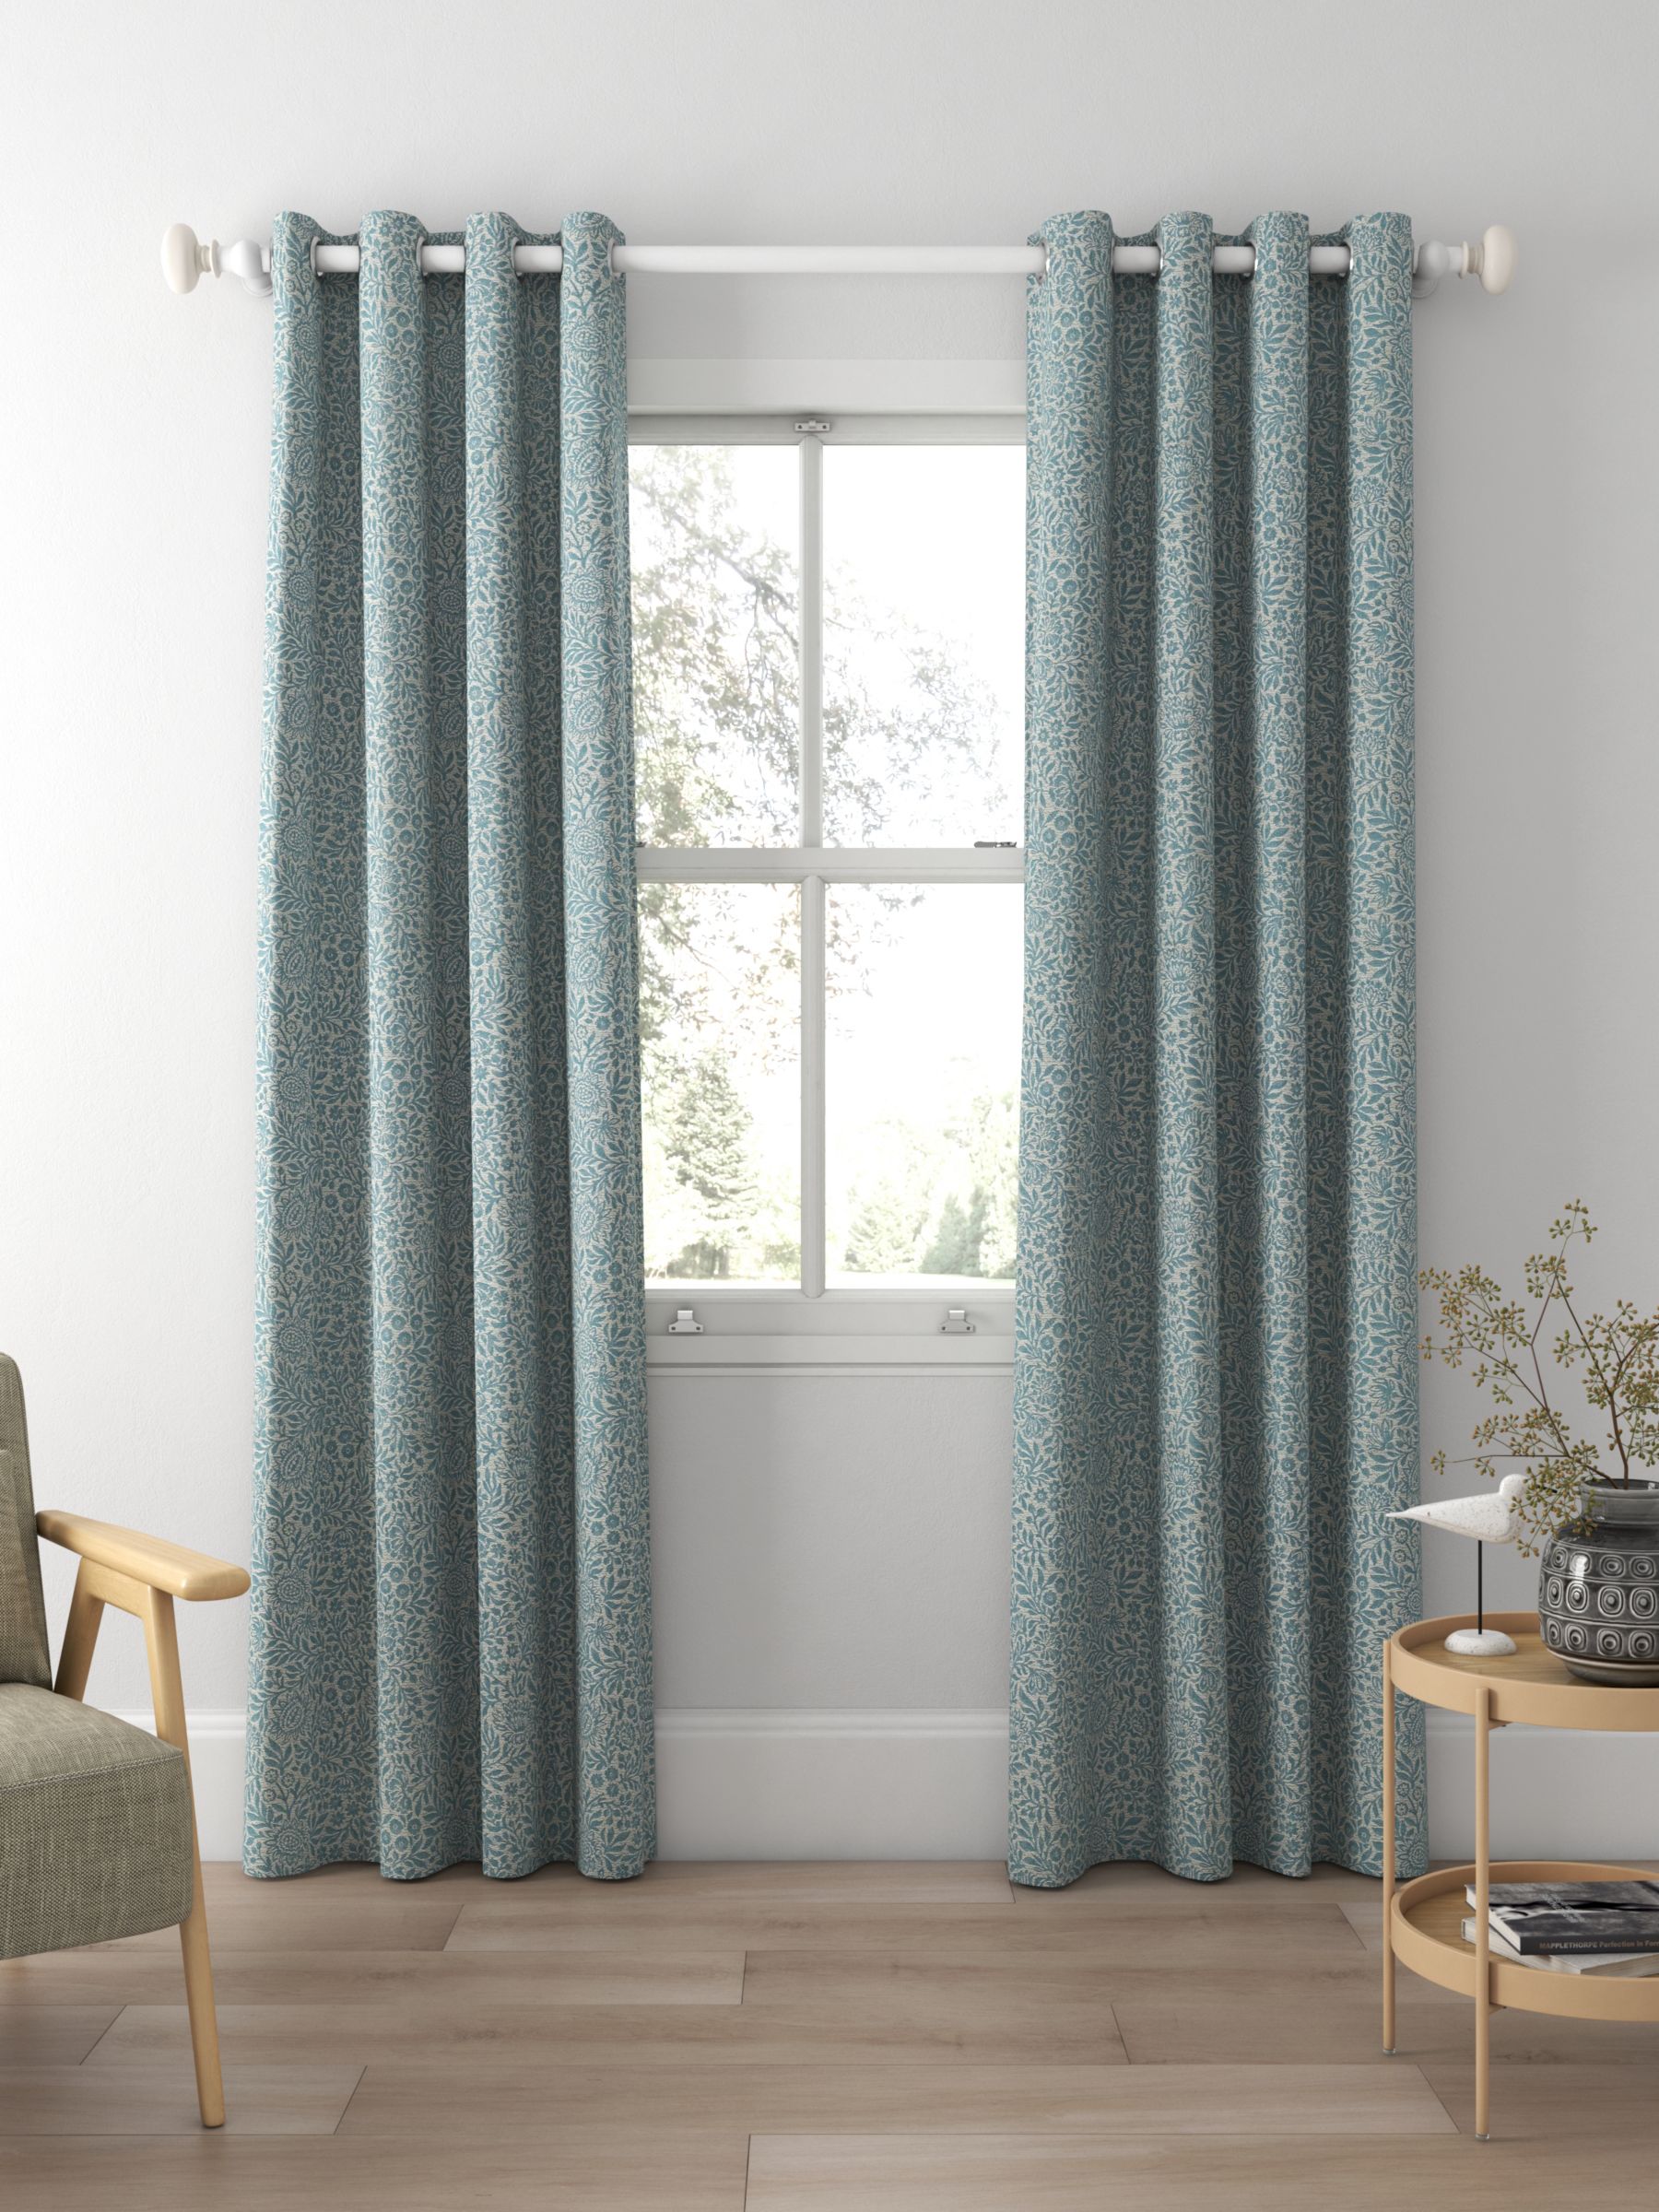 John Lewis & Partners Hidcote Weave Made to Measure Curtains or Roman ...